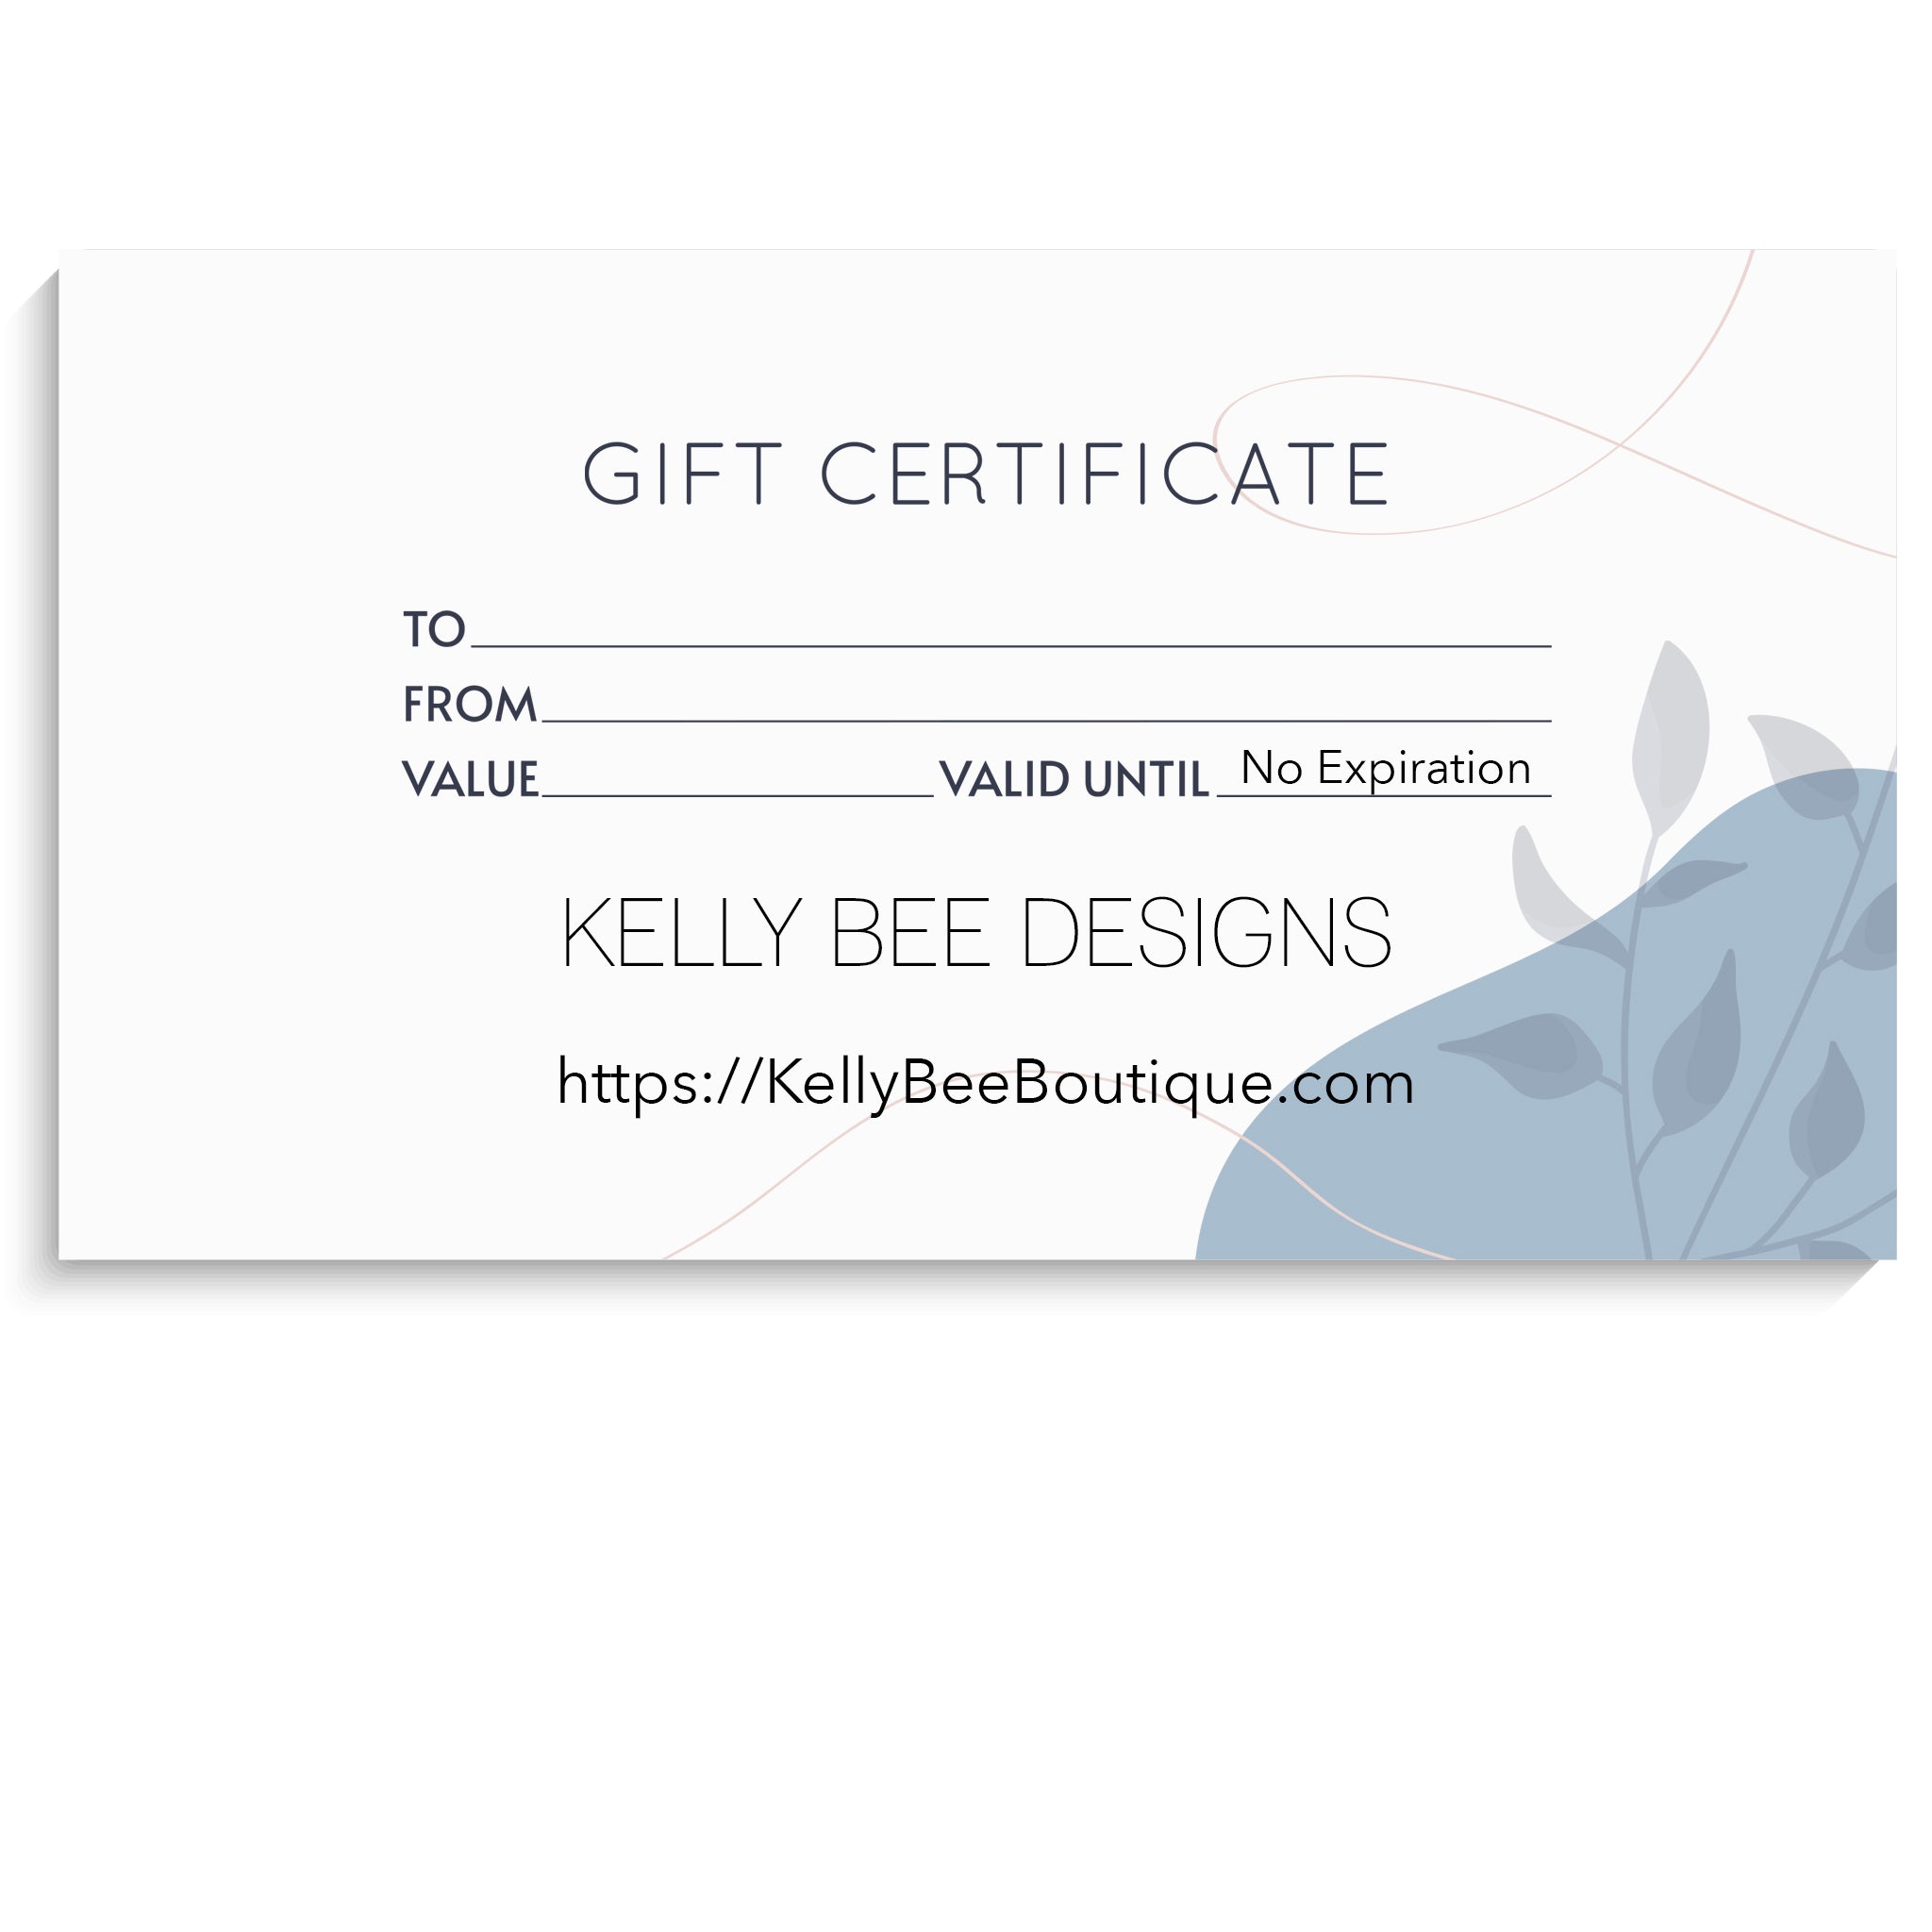 Kelly Bee Recovery Gift Card